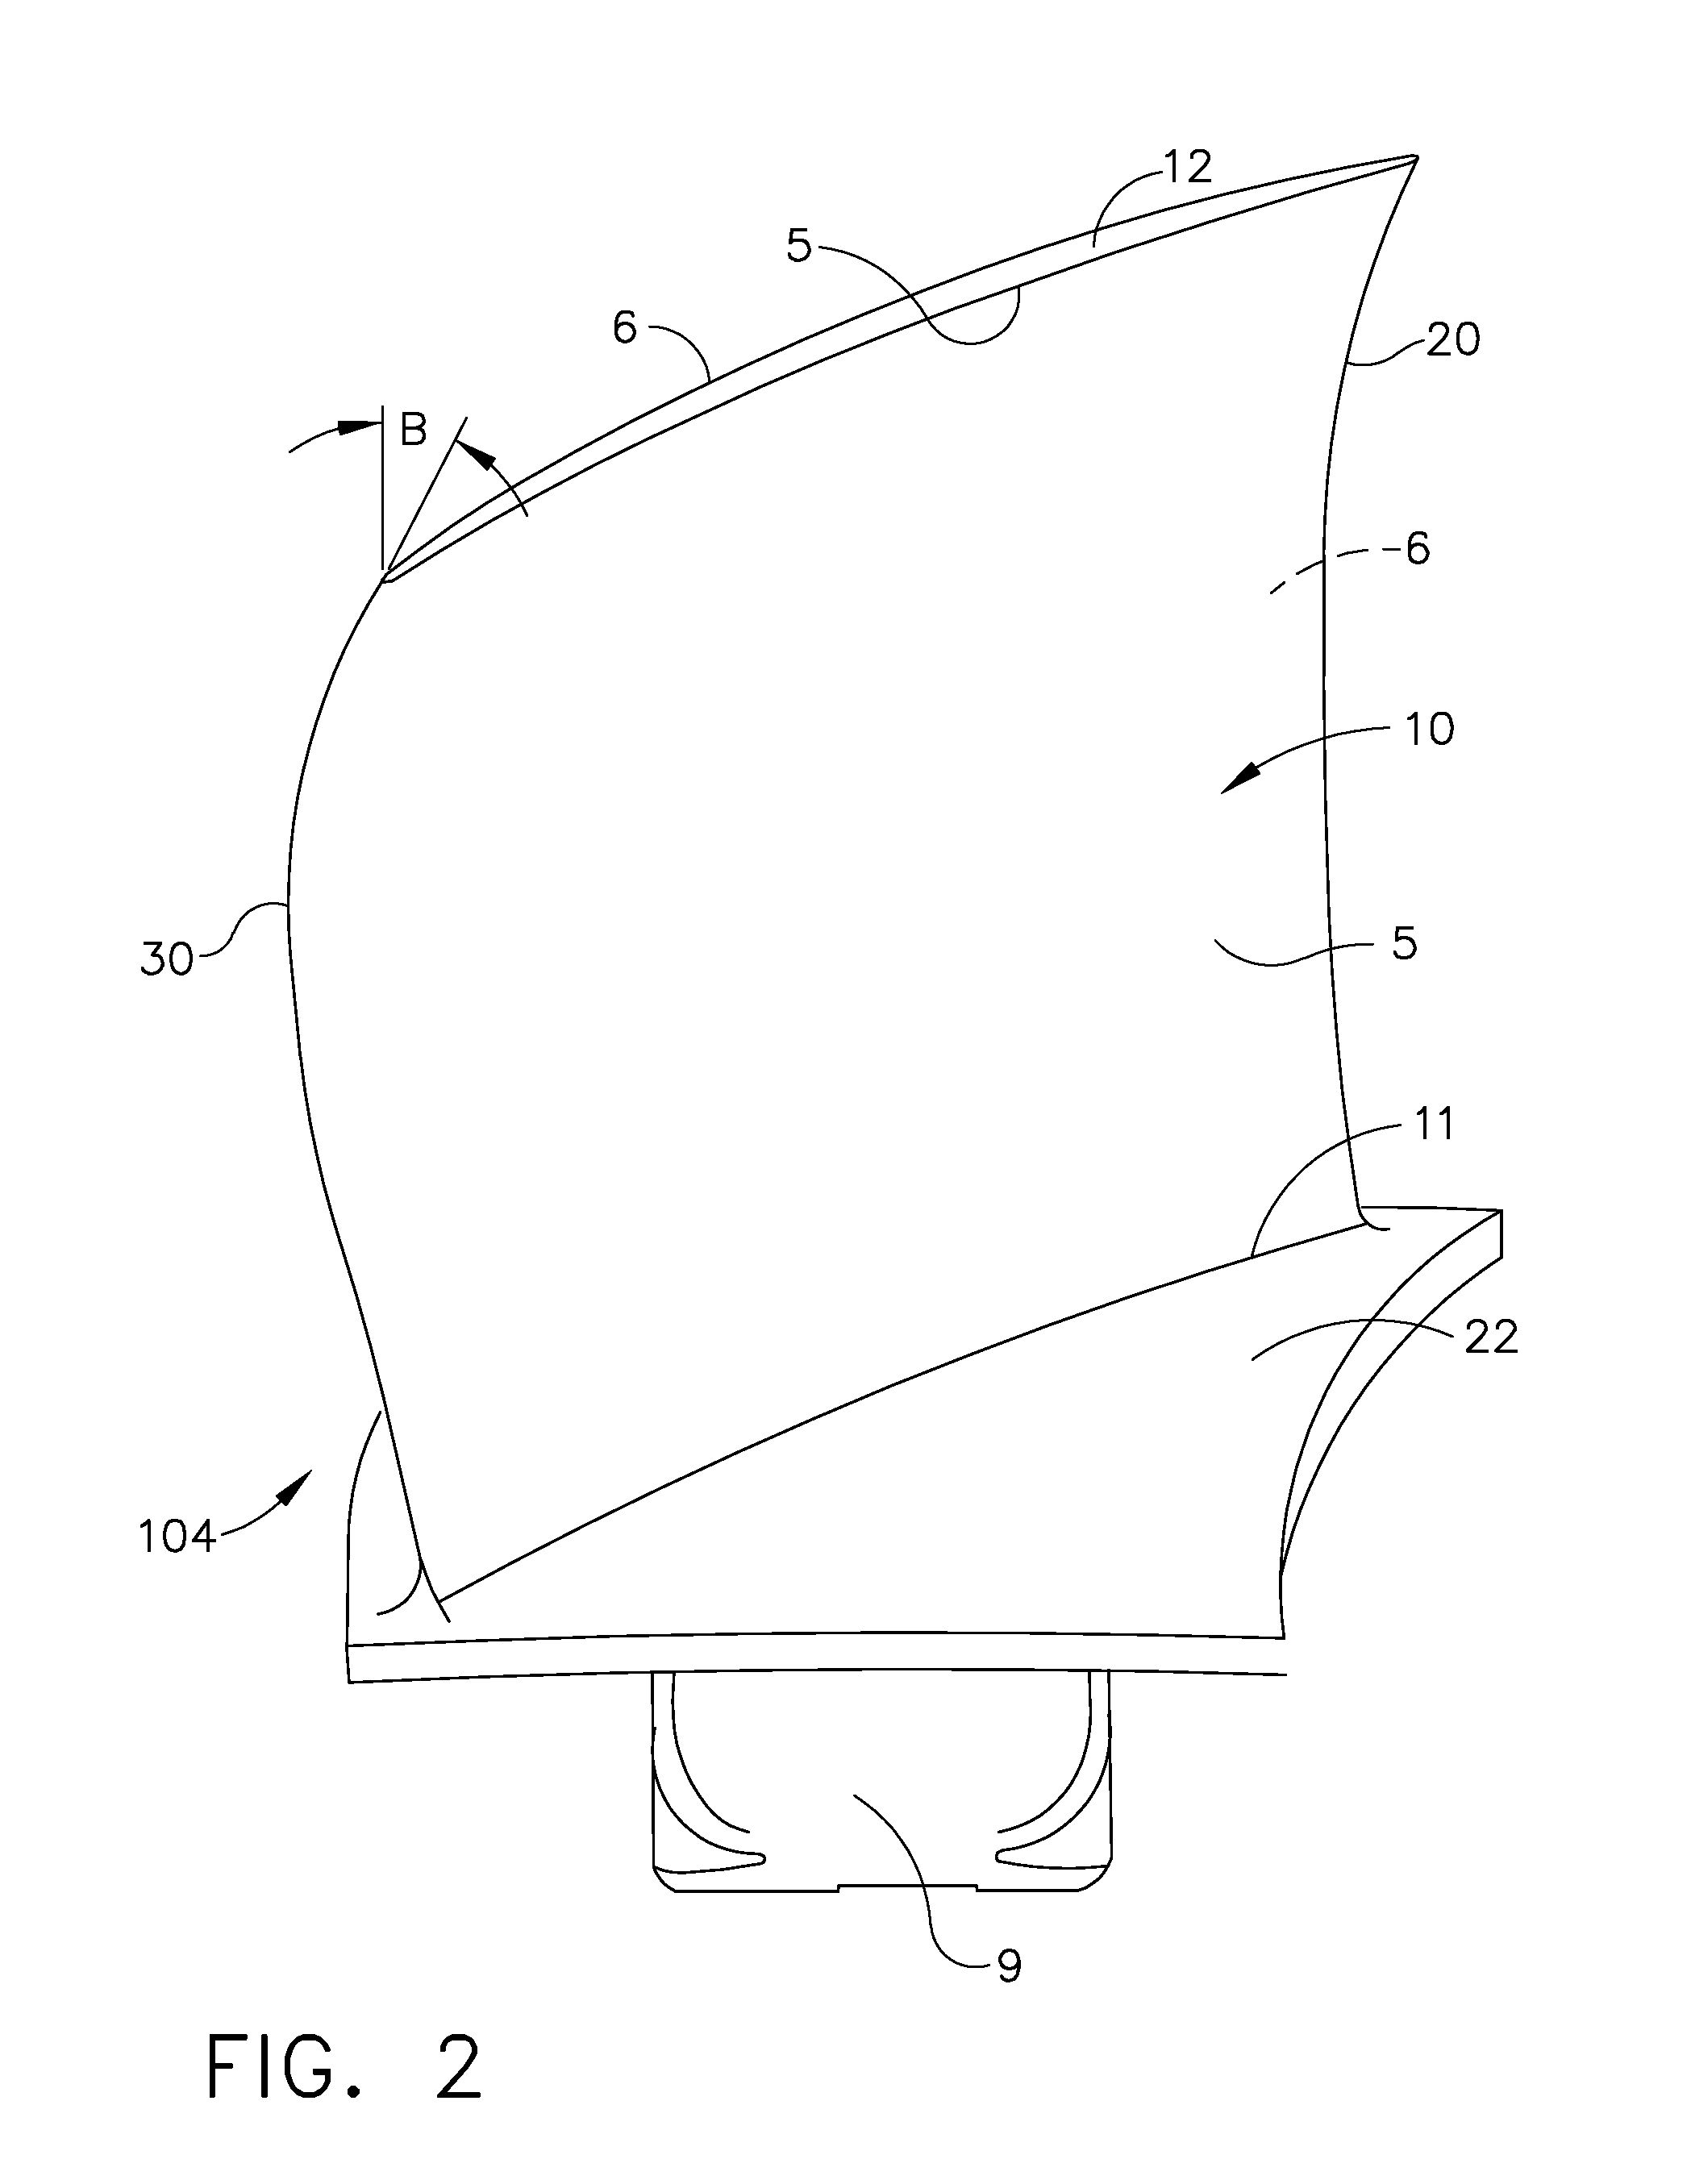 Compressor airfoil with tip dihedral